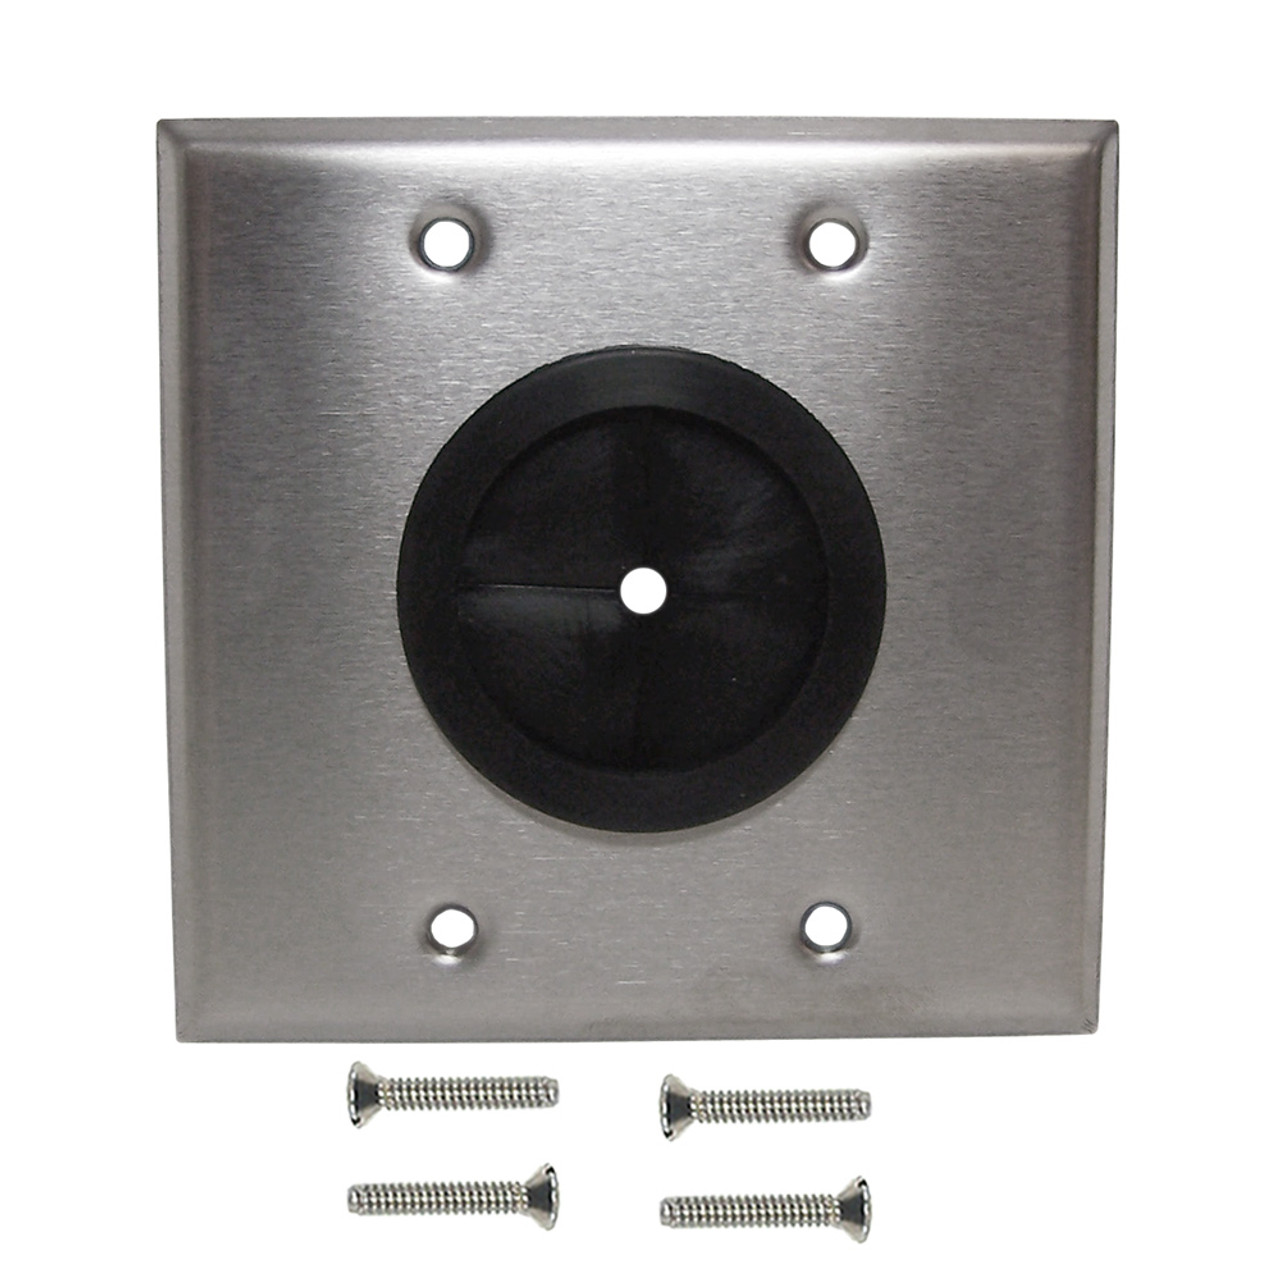 Cable Pass through Wall Plate Double Gang Stainless Steel